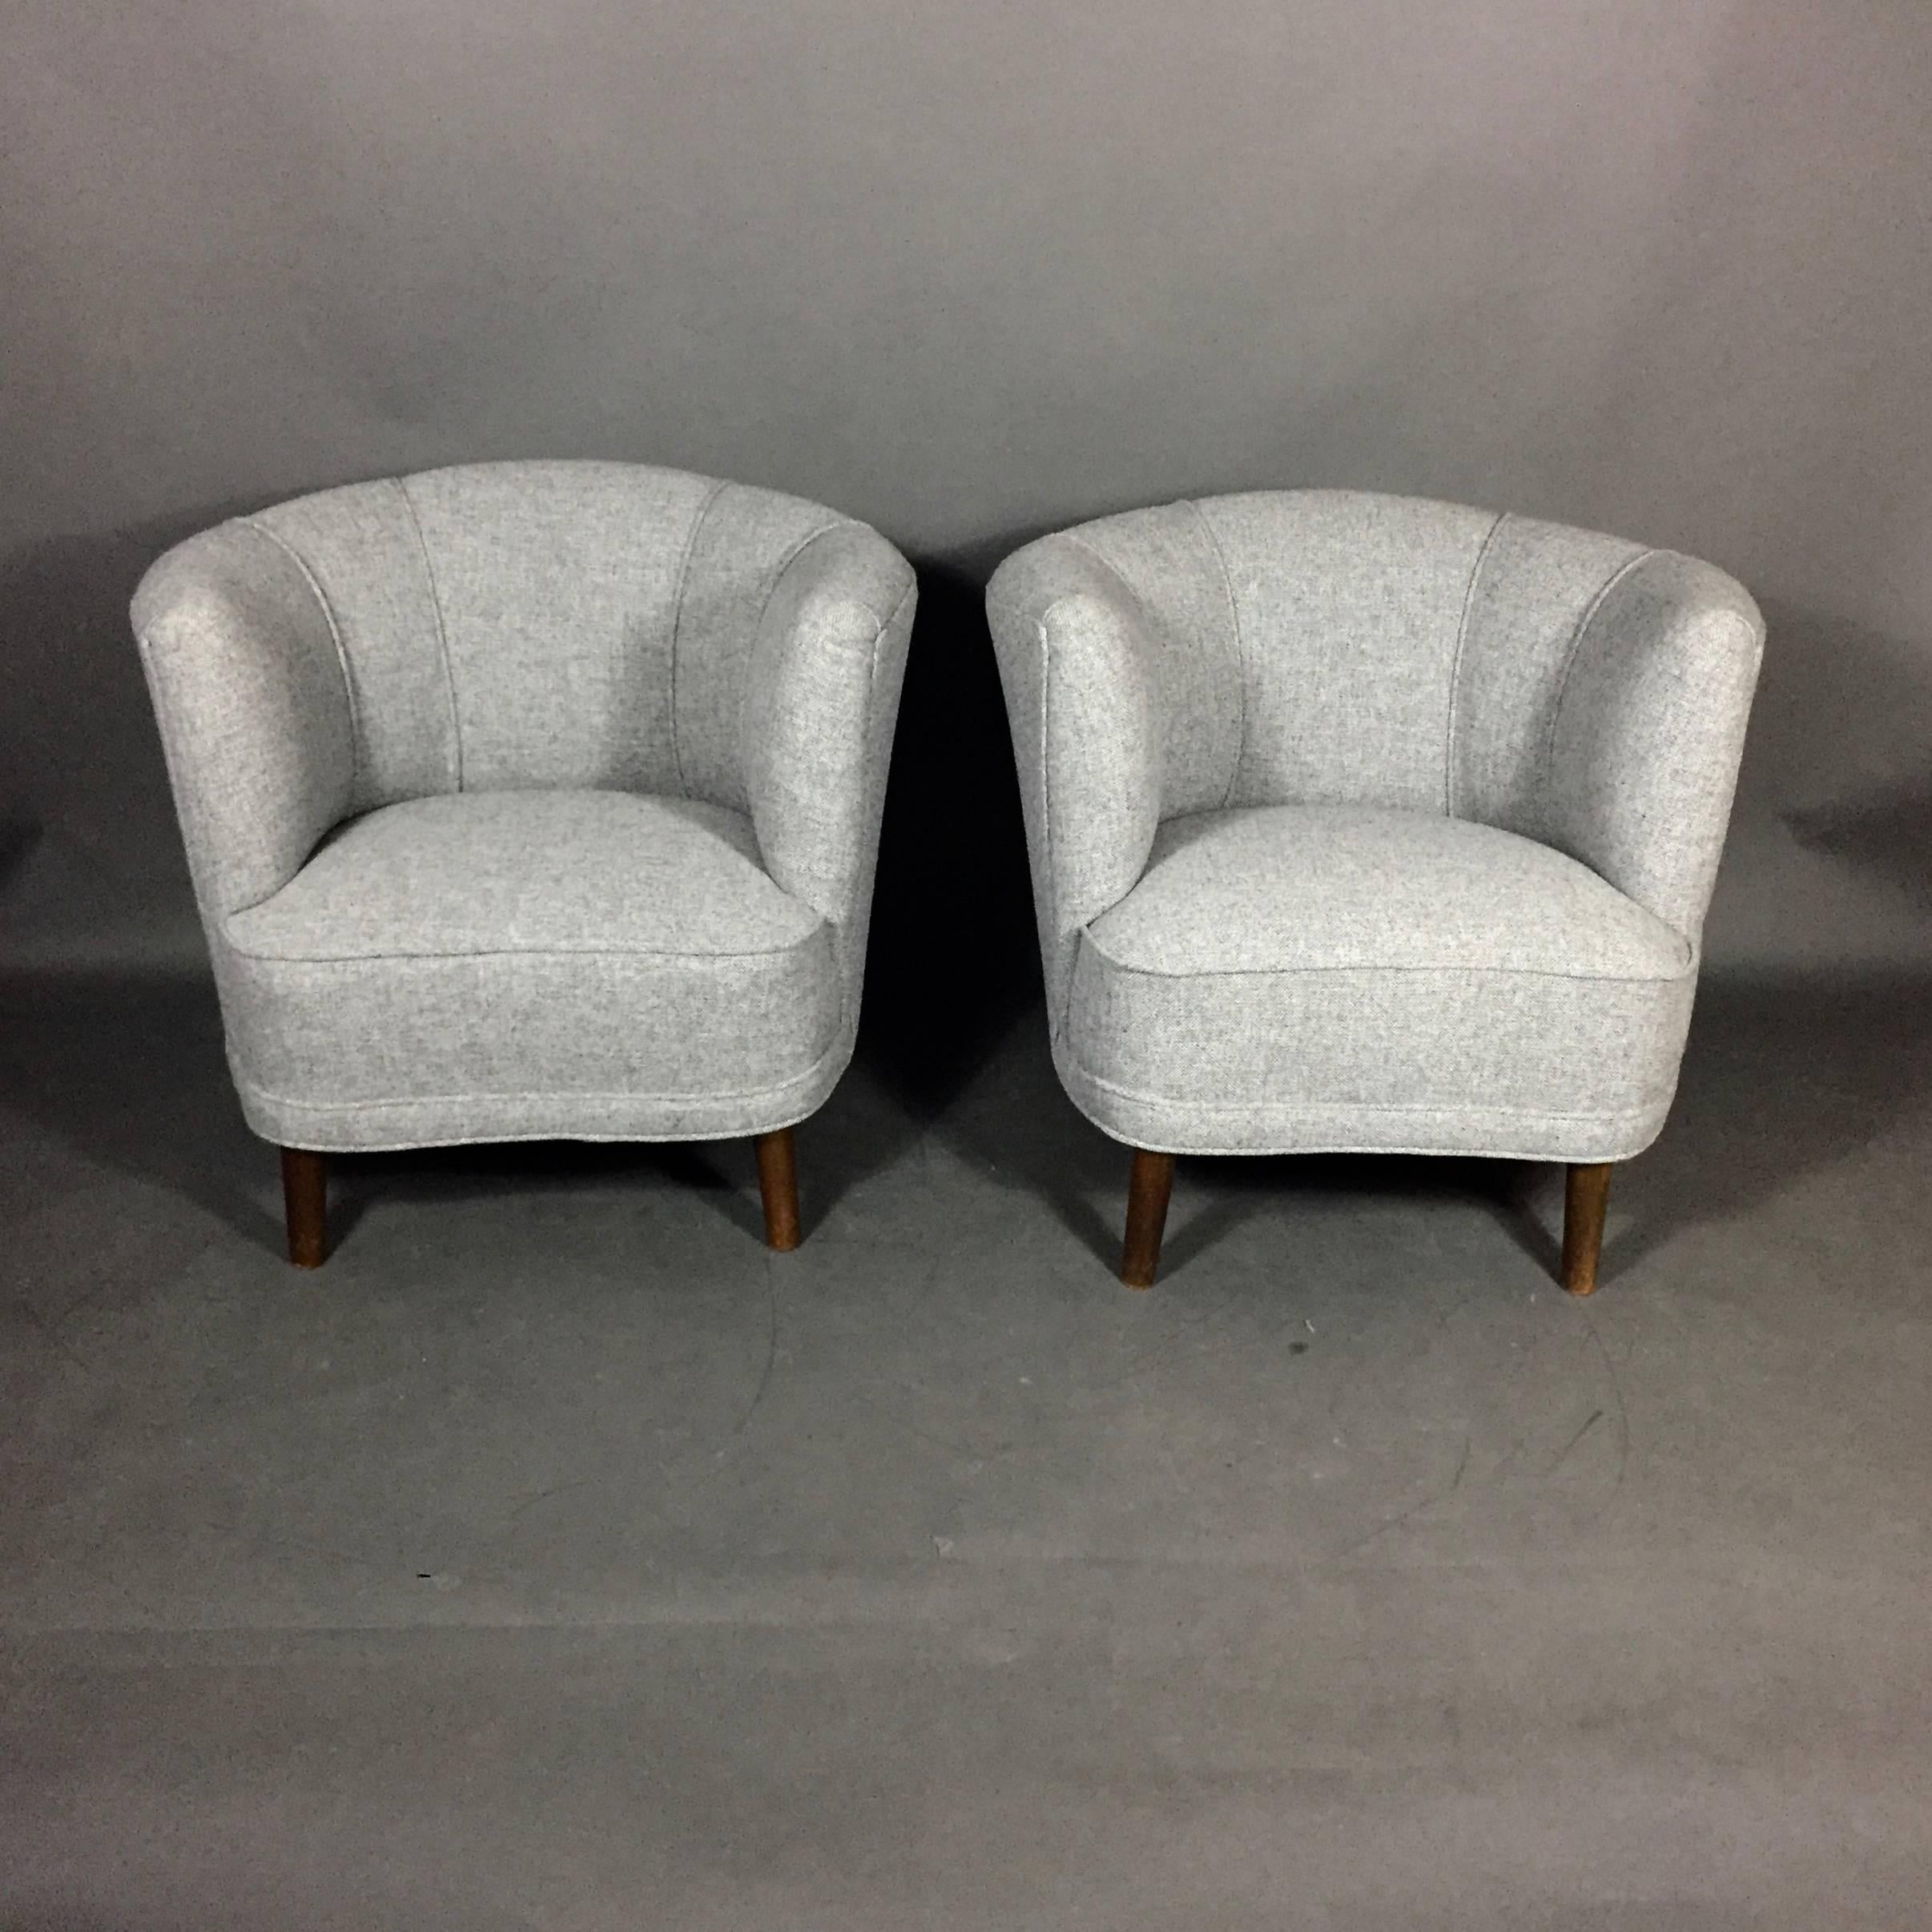 Wonderful smaller scale that one would expect for the late 1940s or early 1950s Scandinavian club chair with beautifully curved back and recently upholstered in a Halingdal wool. Great condition and comfort not to mention chic. Danish or Swedish.